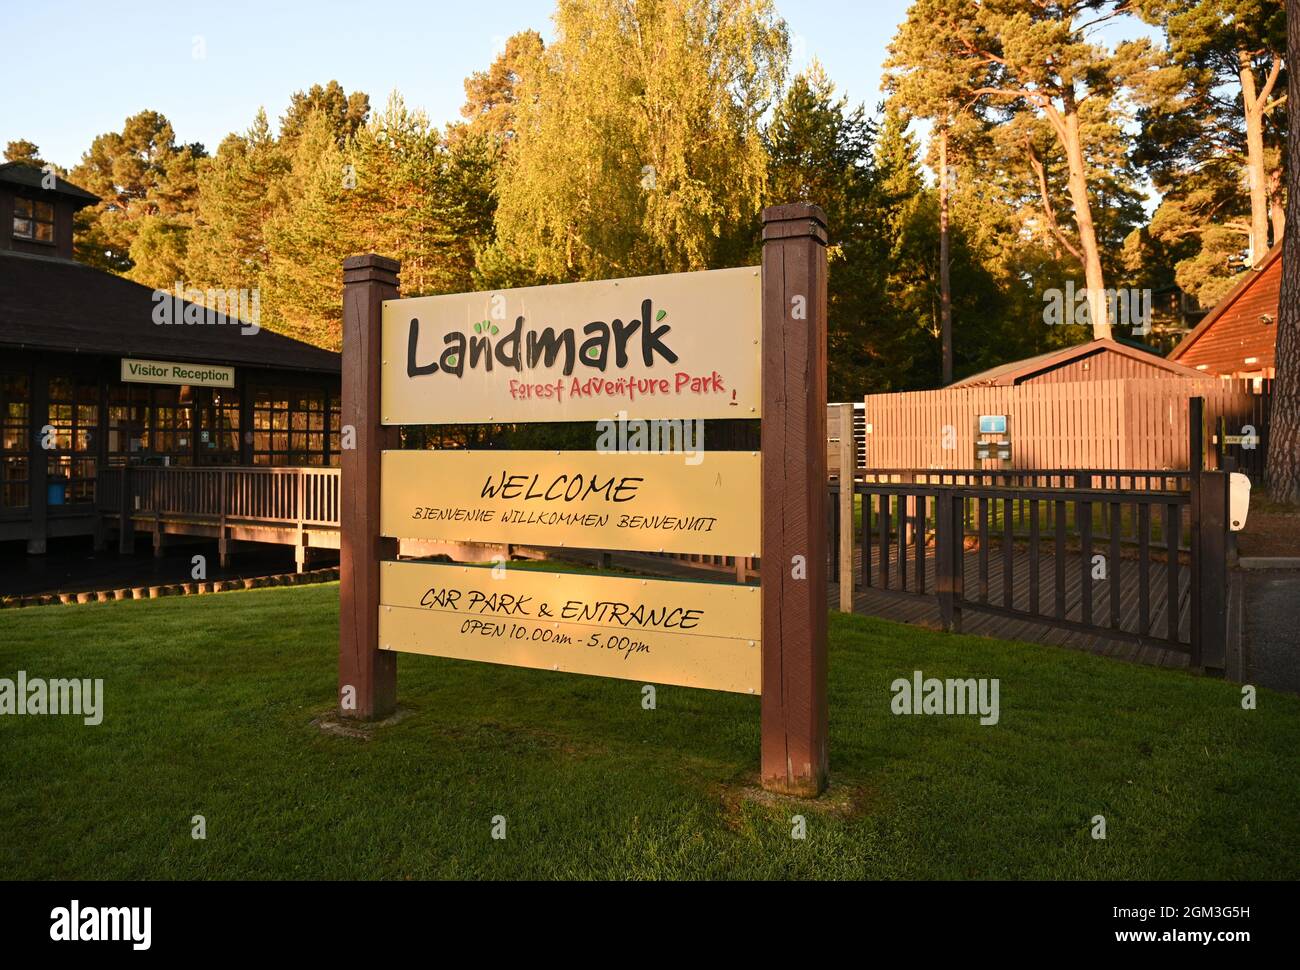 Sign for Landmark Forest Adventure Park, a theme park in the Scottish Highlands. Blurred background of visitor reception, buildings and trees. Stock Photo